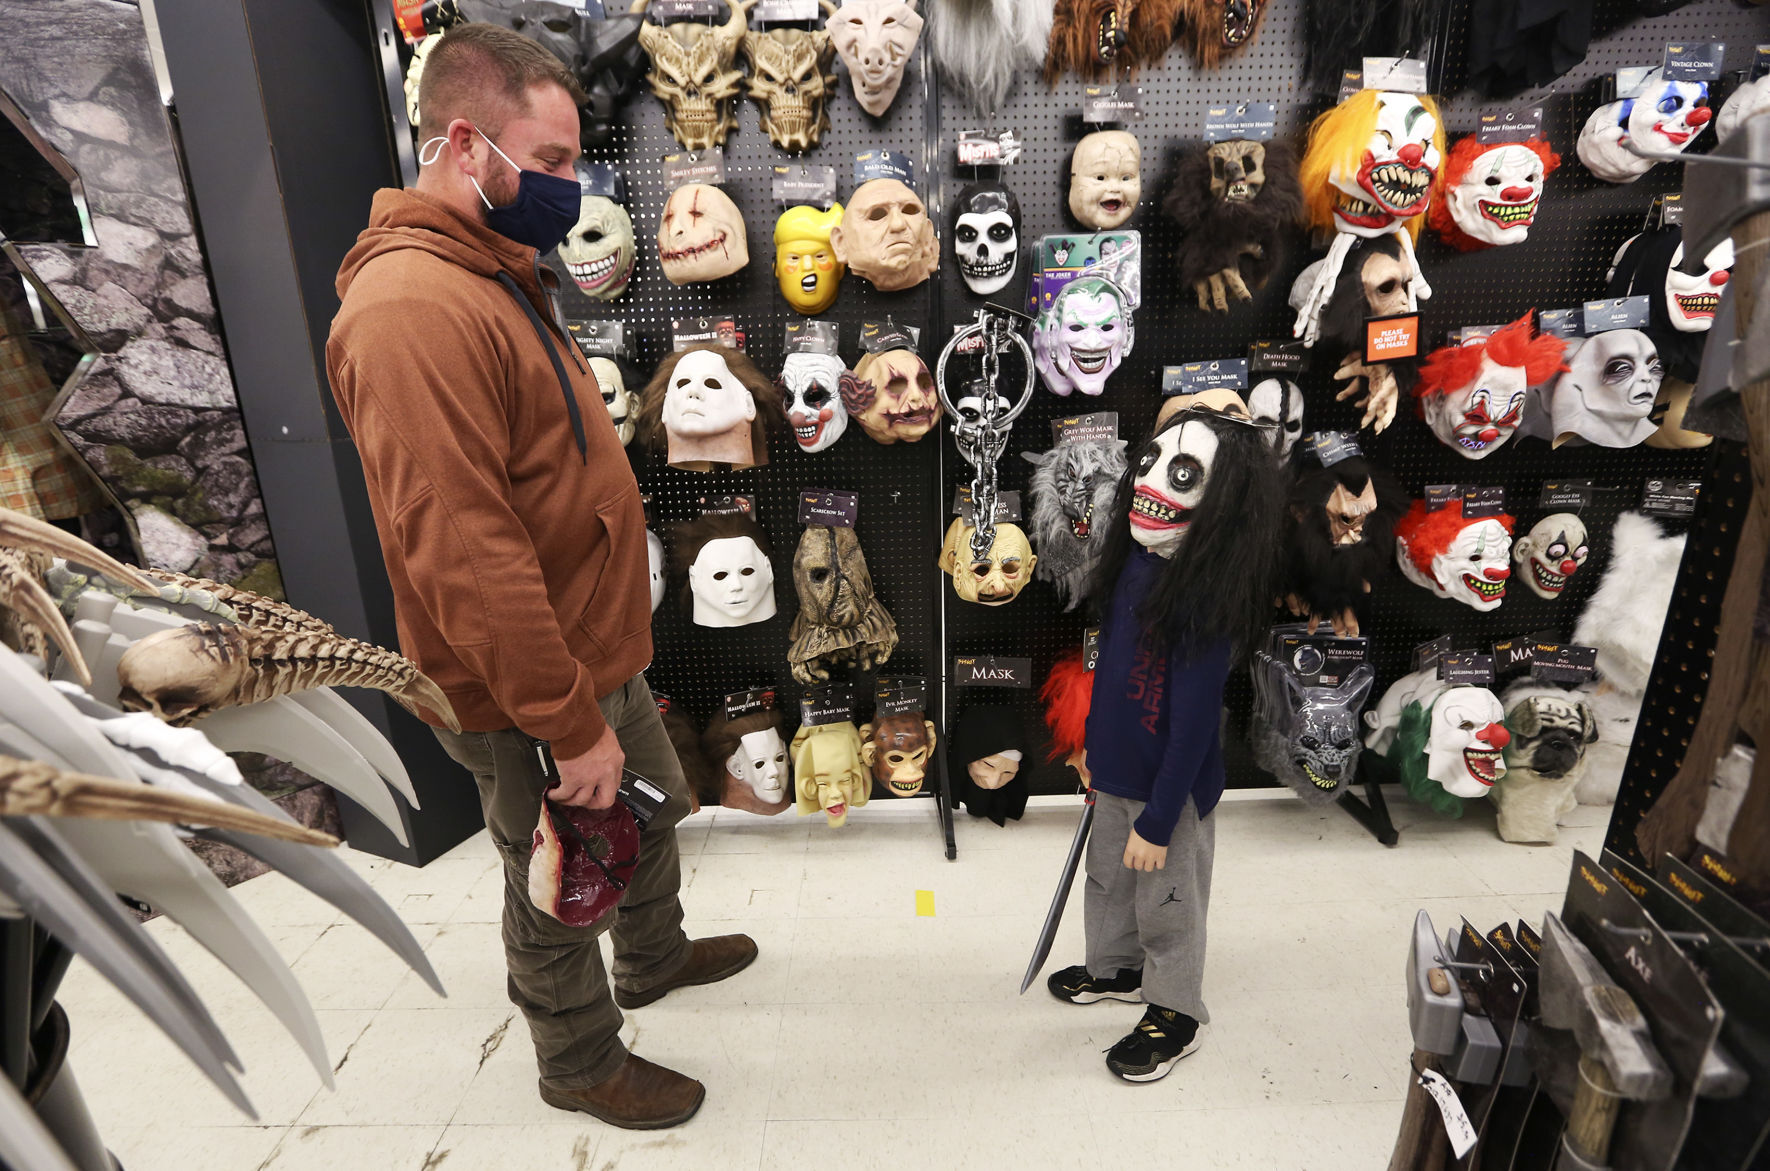 Drexel Thole, 7, shows off a mask to Jadyn Thole, of La Motte, Iowa, while shopping at Spirit Halloween in Dubuque on Tuesday. Local retailers report strong interest in Halloween-related merchandise this year. PHOTO CREDIT: NICKI KOHL